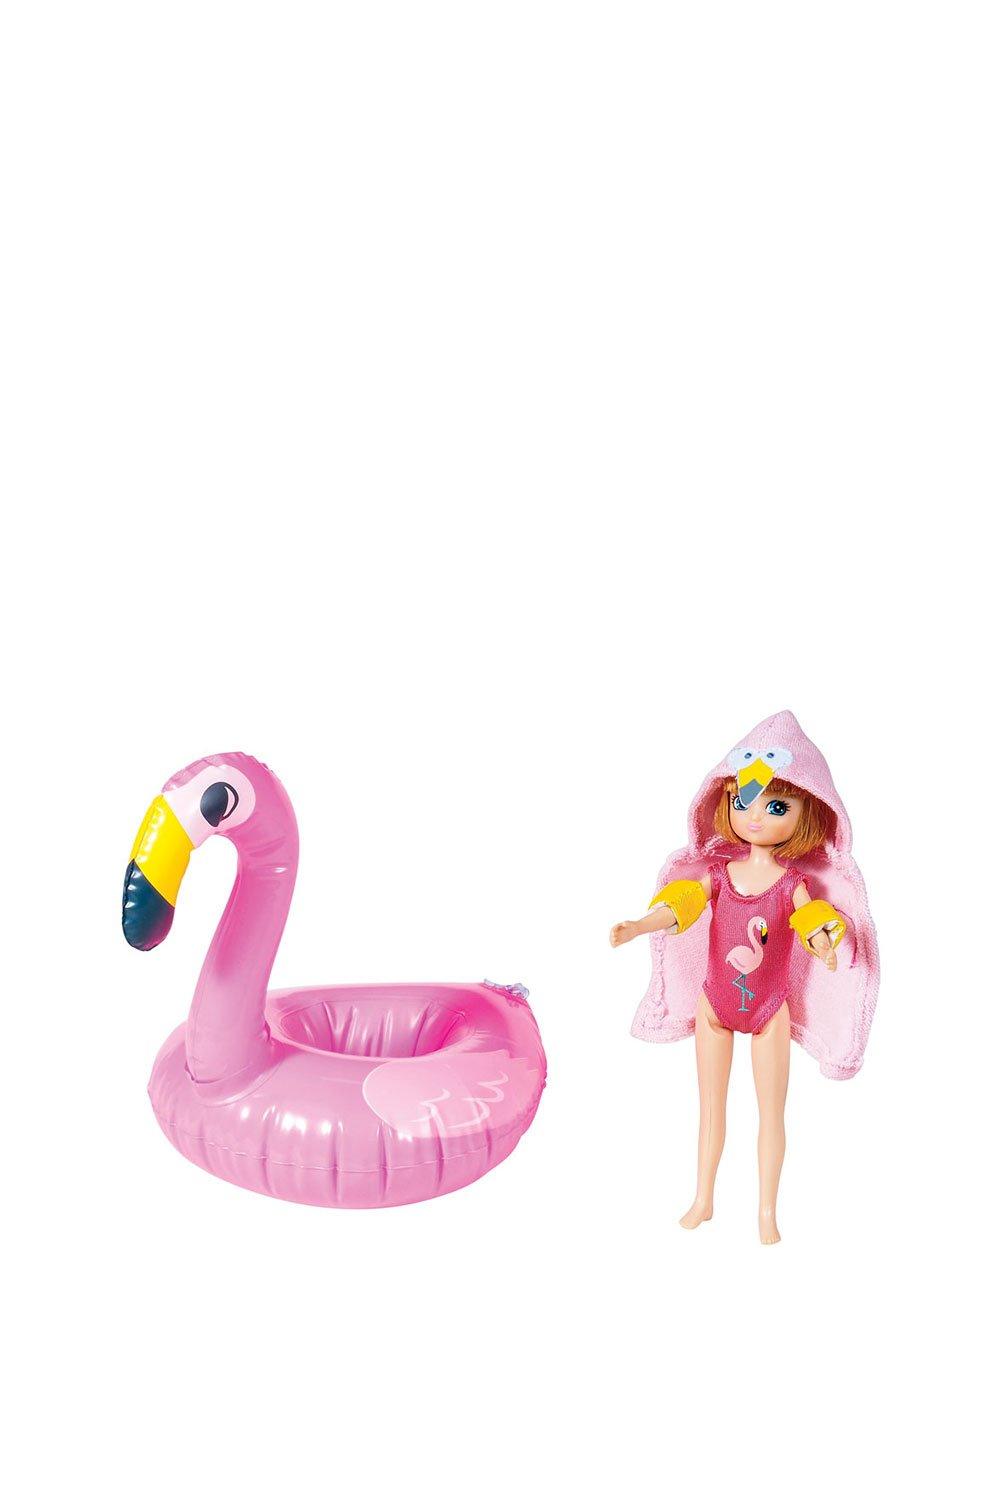 Pool Party Doll Playset